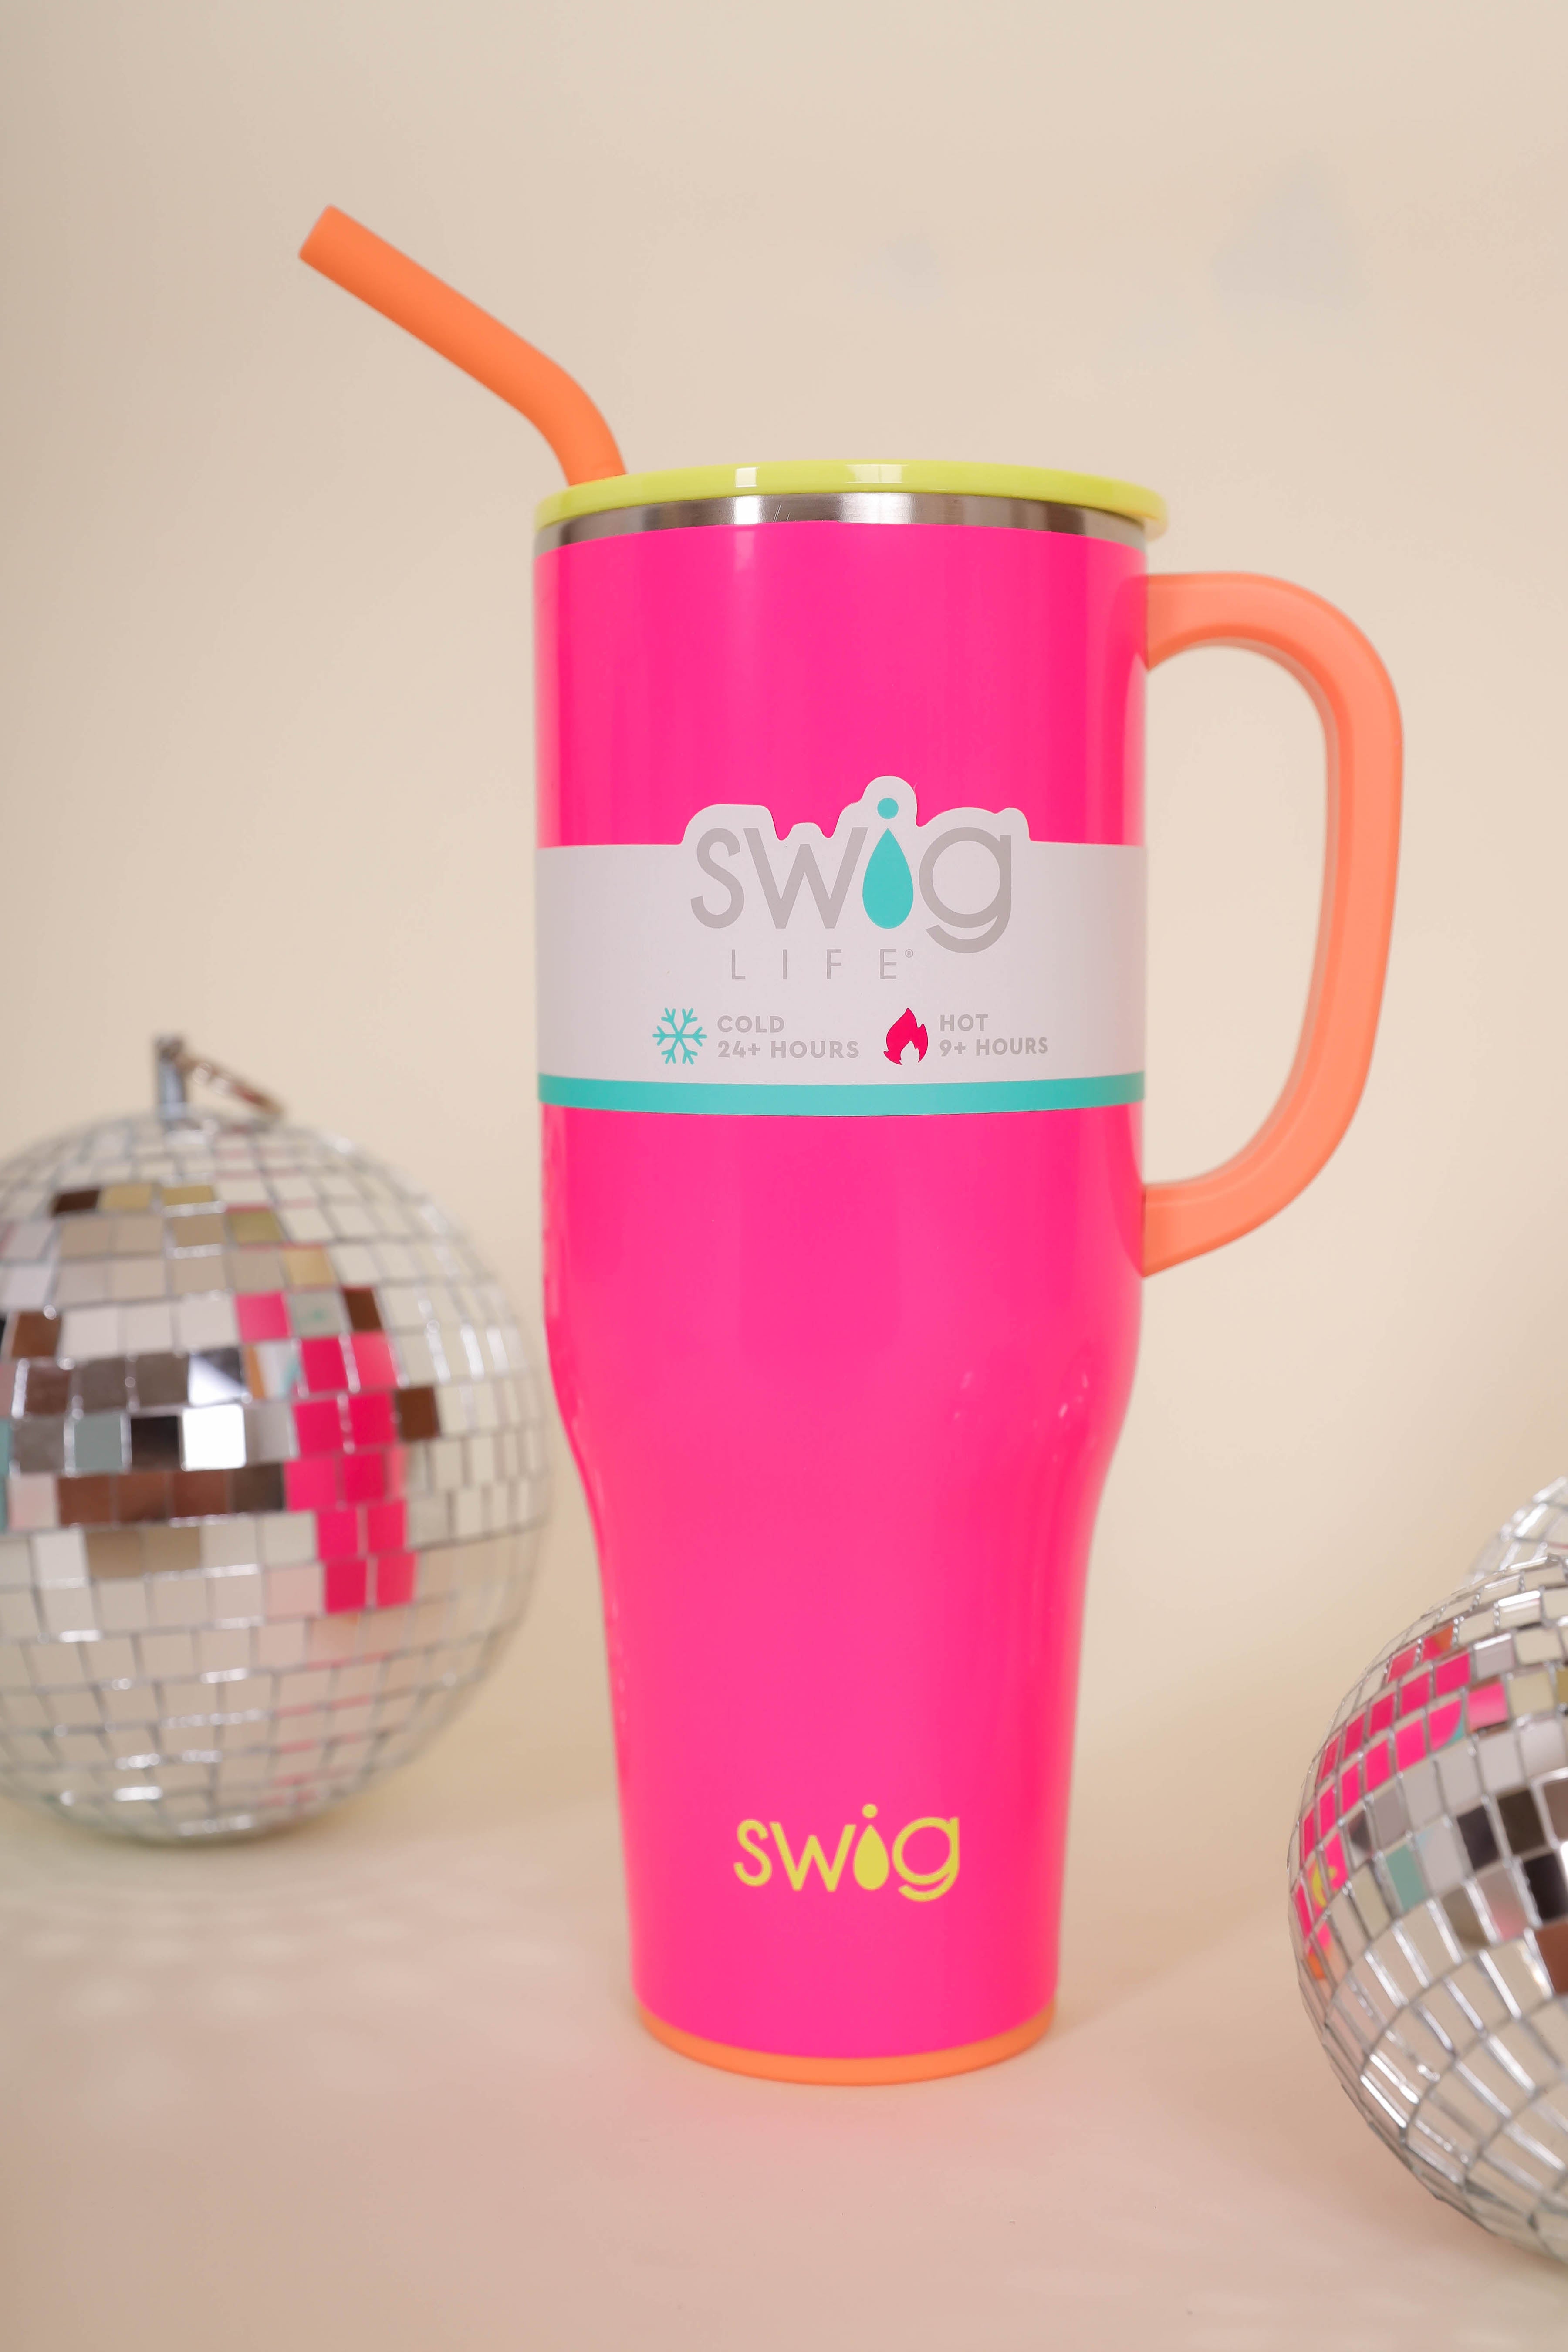  Barbie Pink water bottle, Bright pink stanley cup style, 40oz  tumbler with handle and straw, coffee cup, leak proof thermos travel cups -  swig coffee cup with handle, water bottle: Home